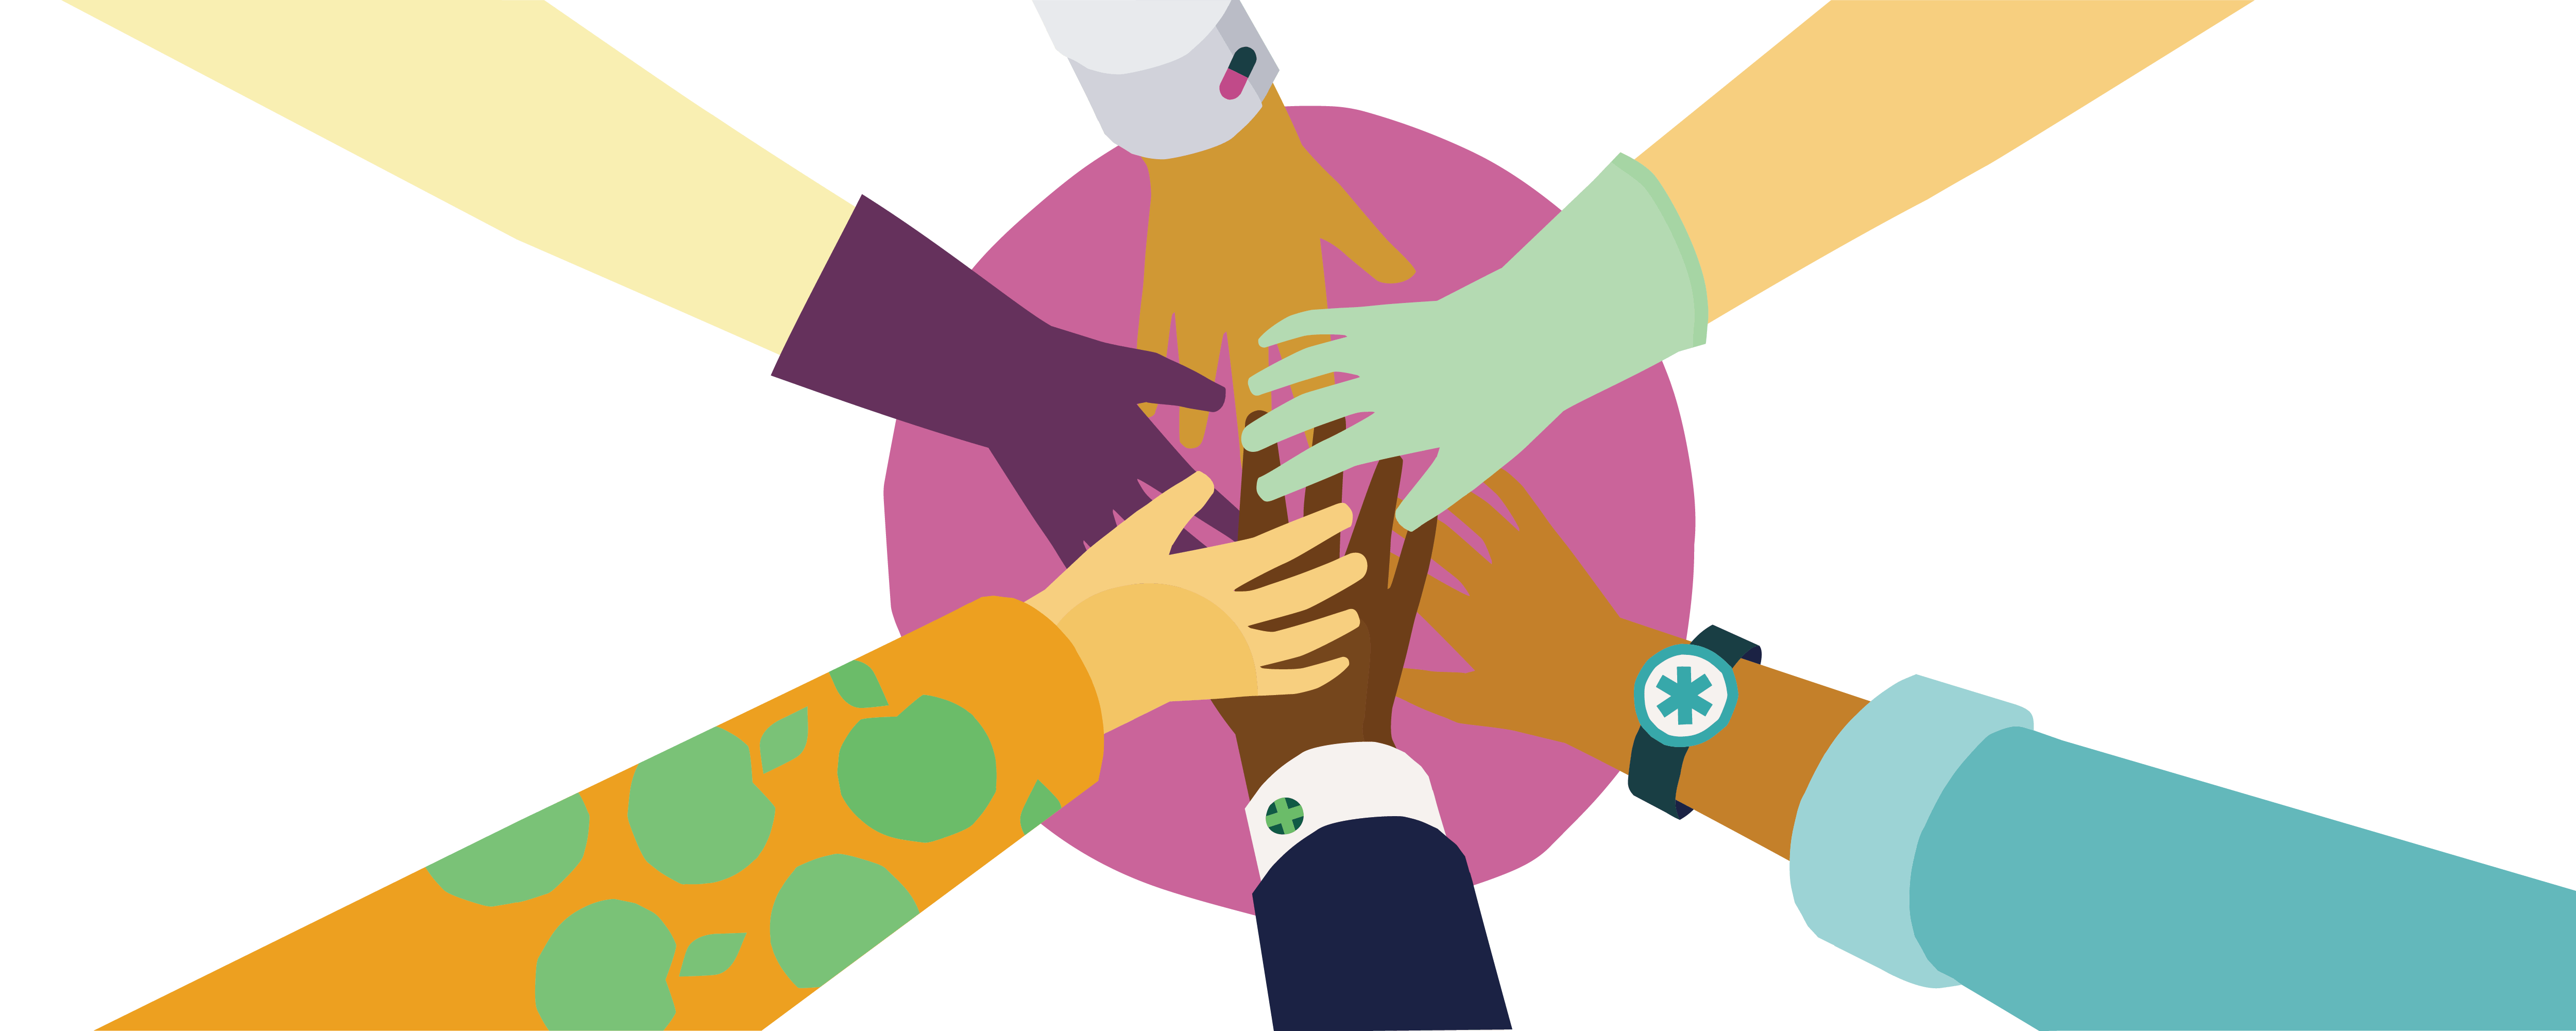 Integration with healthcare teams